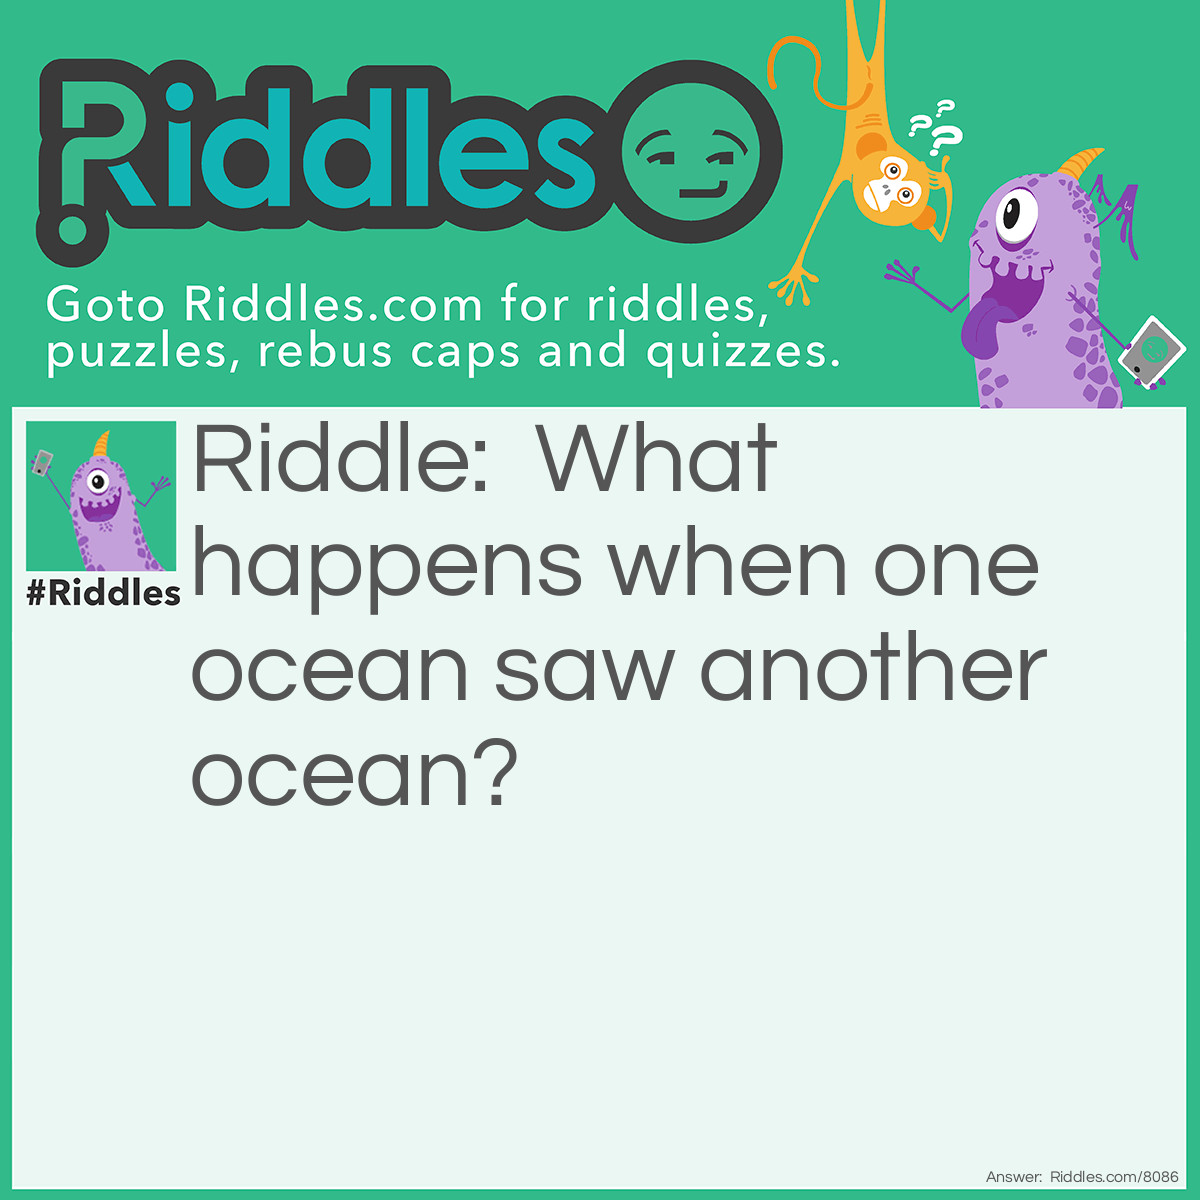 Riddle: What happens when one ocean saw another ocean? Answer: Nothing,they just wave.